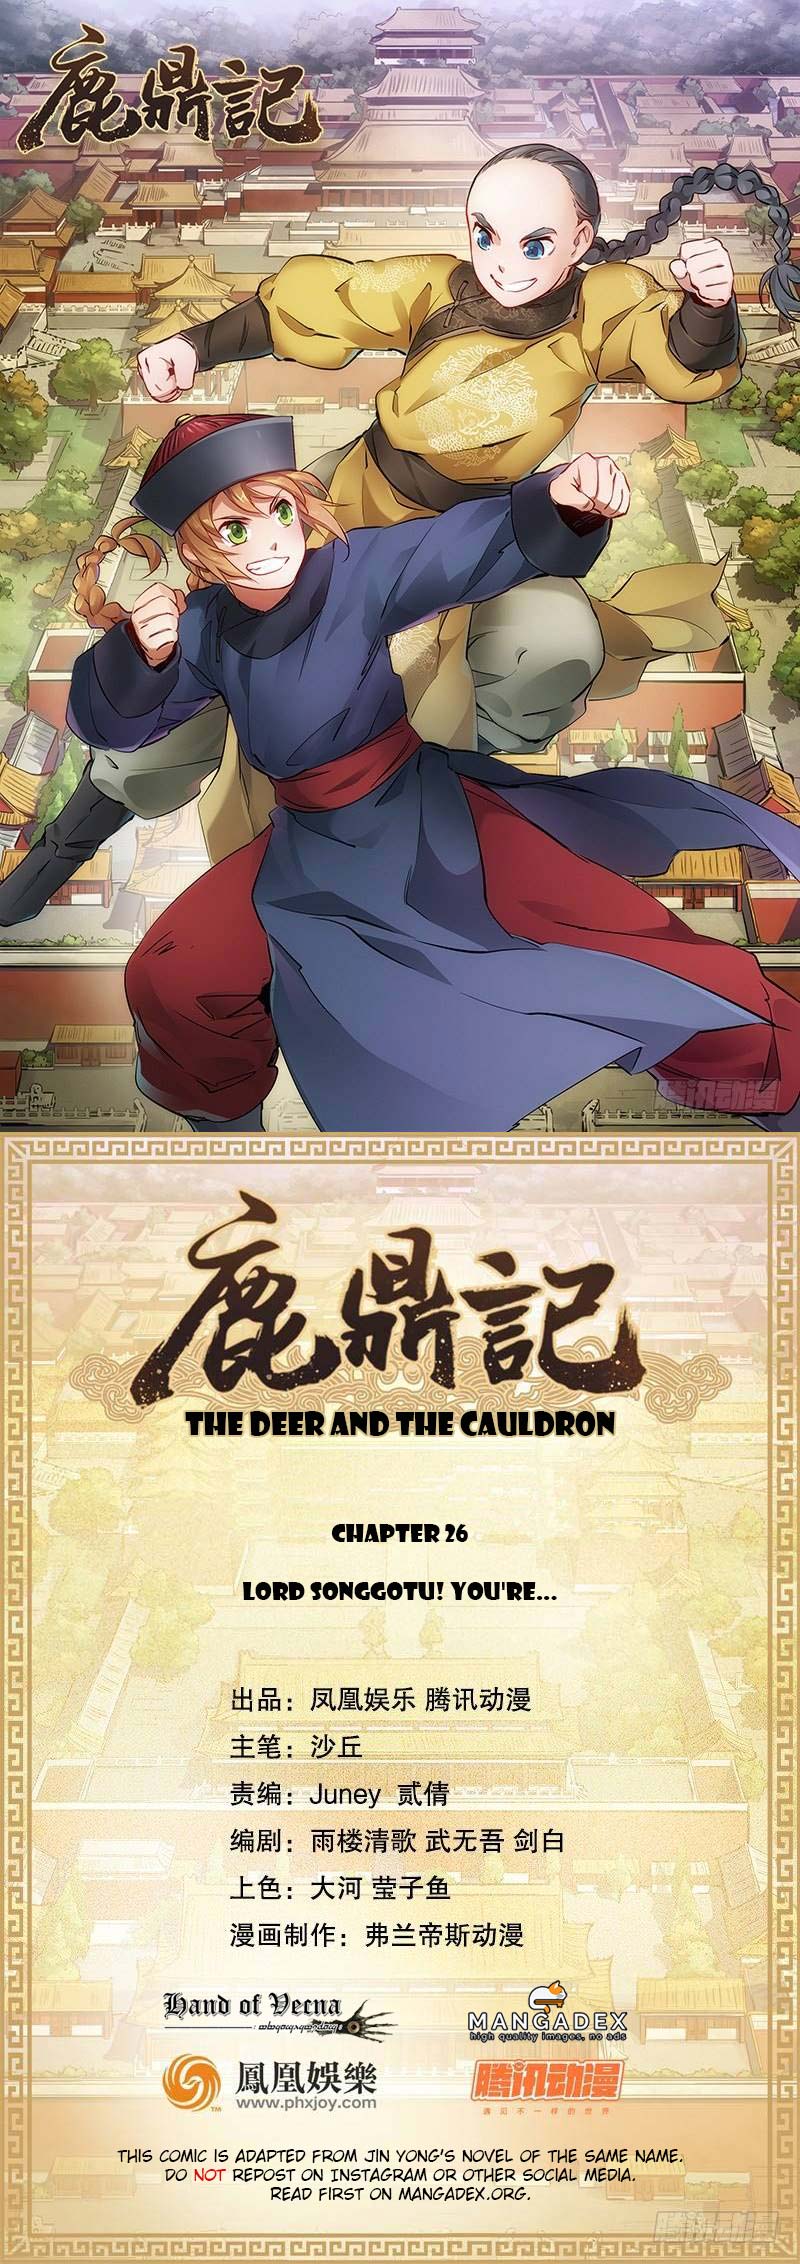 The Deer and the Cauldron Ch. 26 Lord Songgotu! You're...